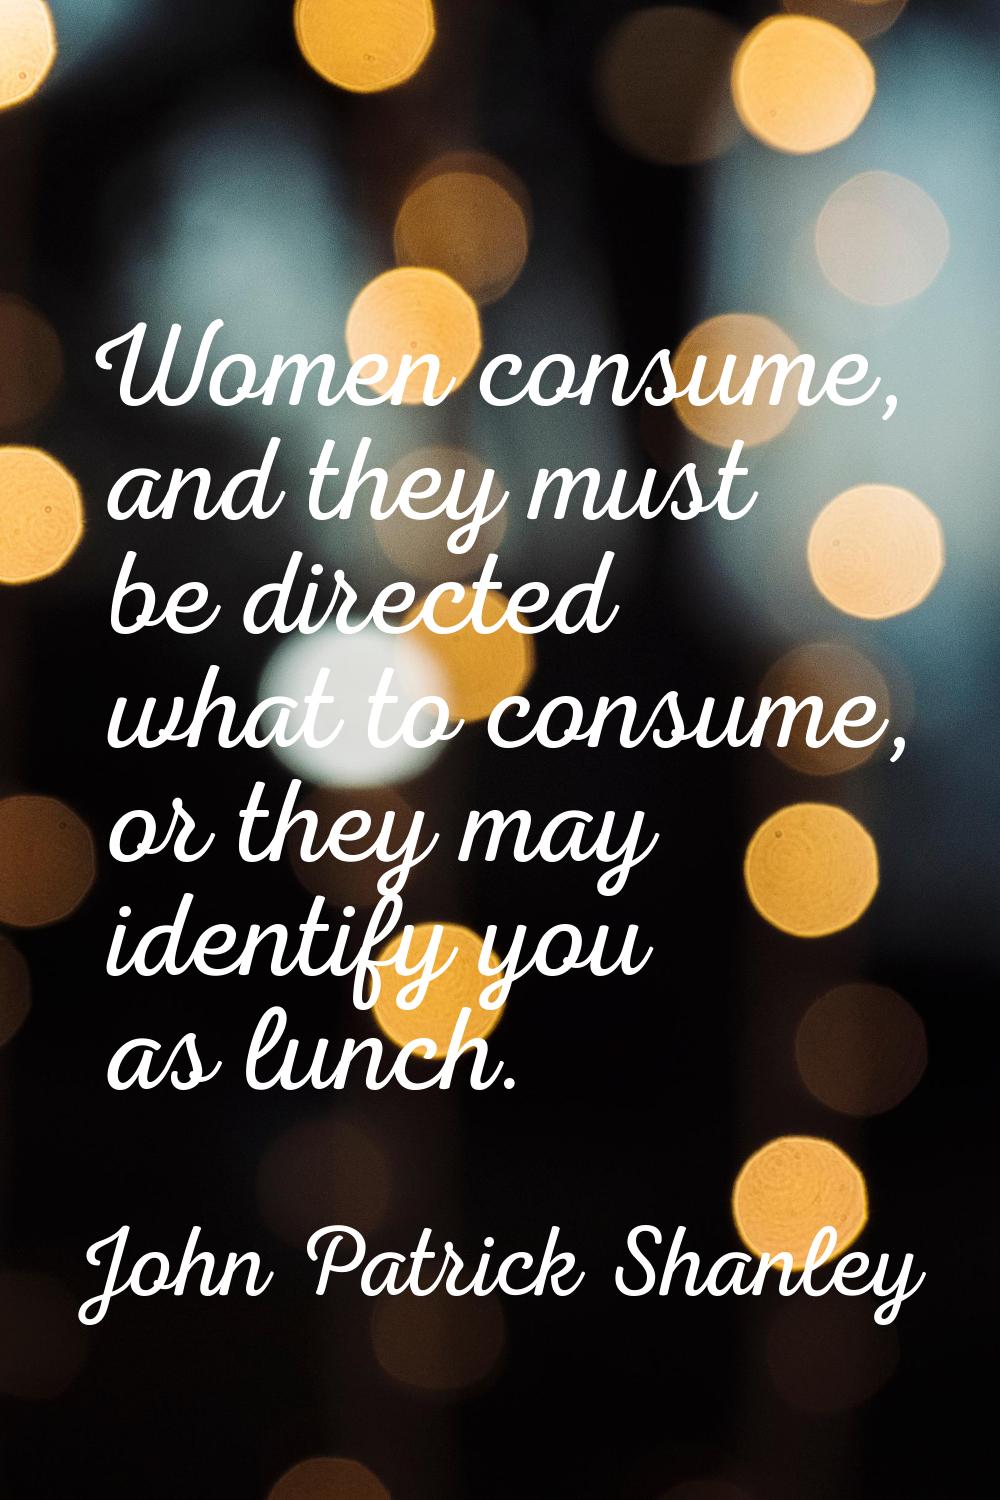 Women consume, and they must be directed what to consume, or they may identify you as lunch.